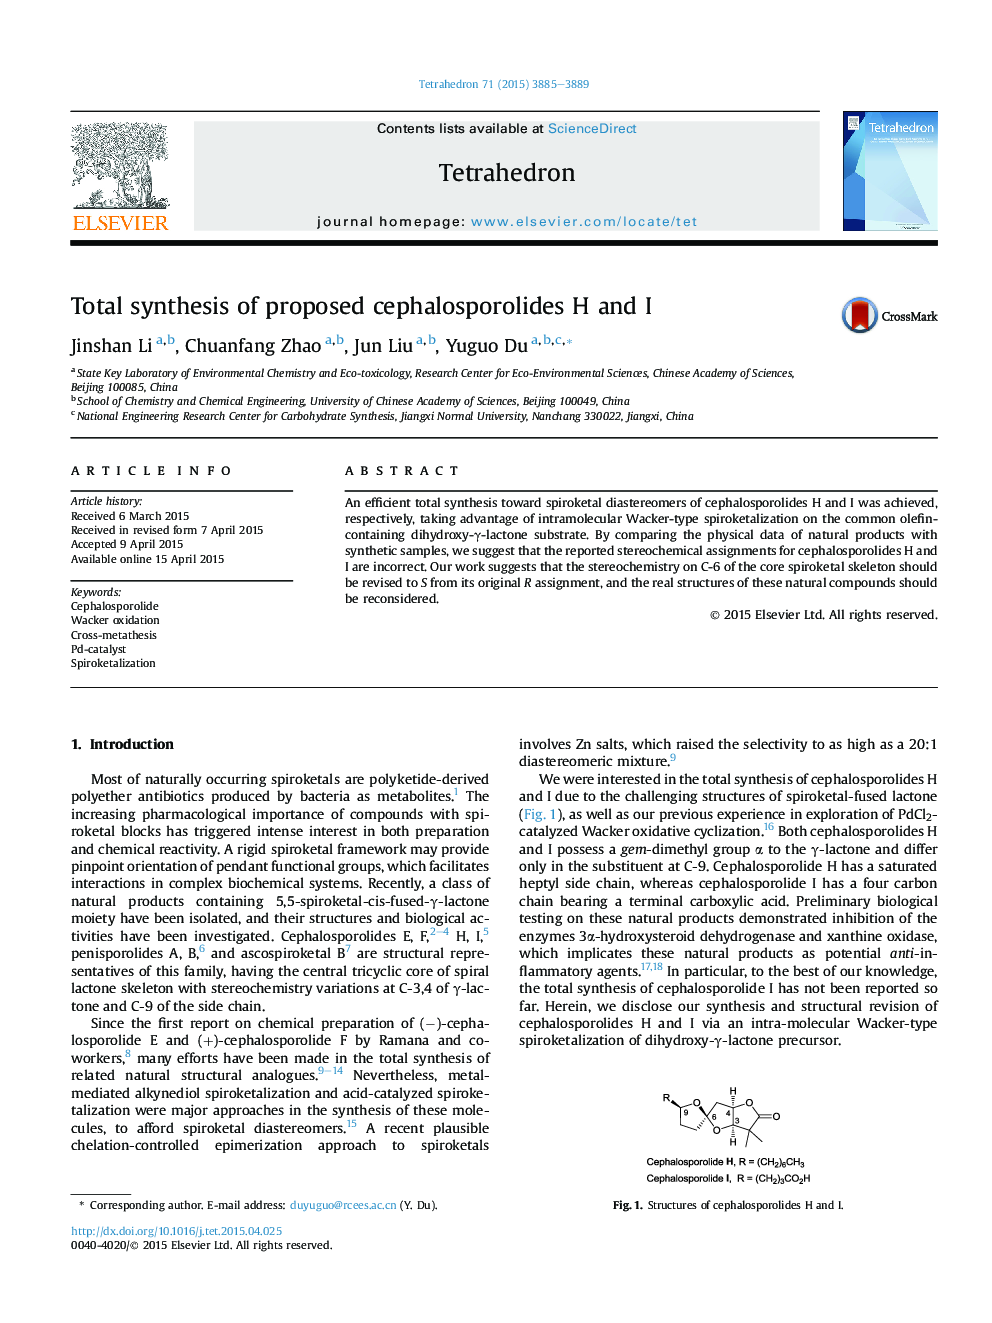 Total synthesis of proposed cephalosporolides H and I